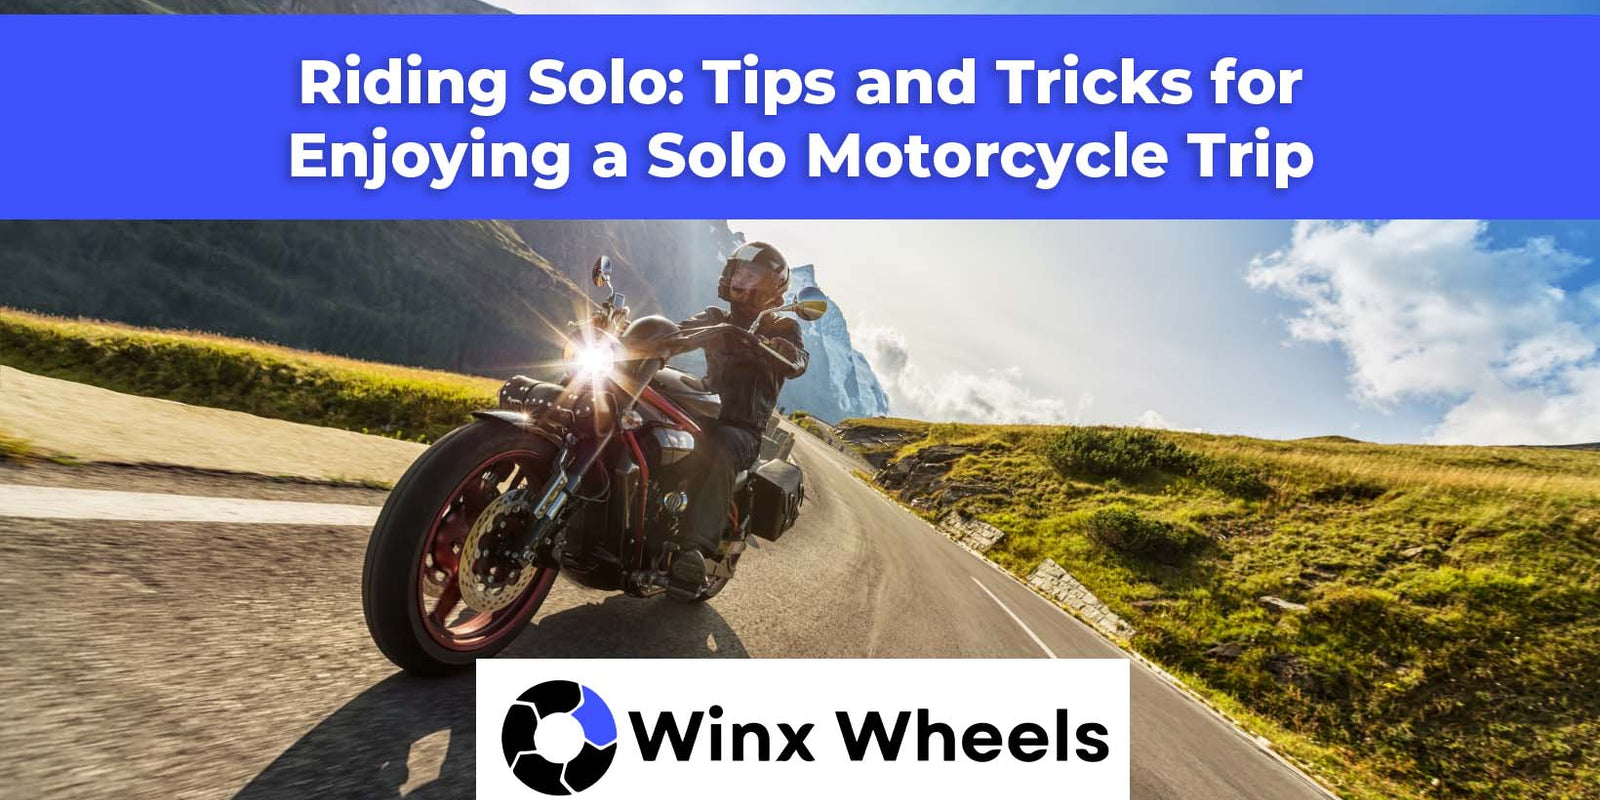 Riding Solo: Tips and Tricks for Enjoying a Solo Motorcycle Trip